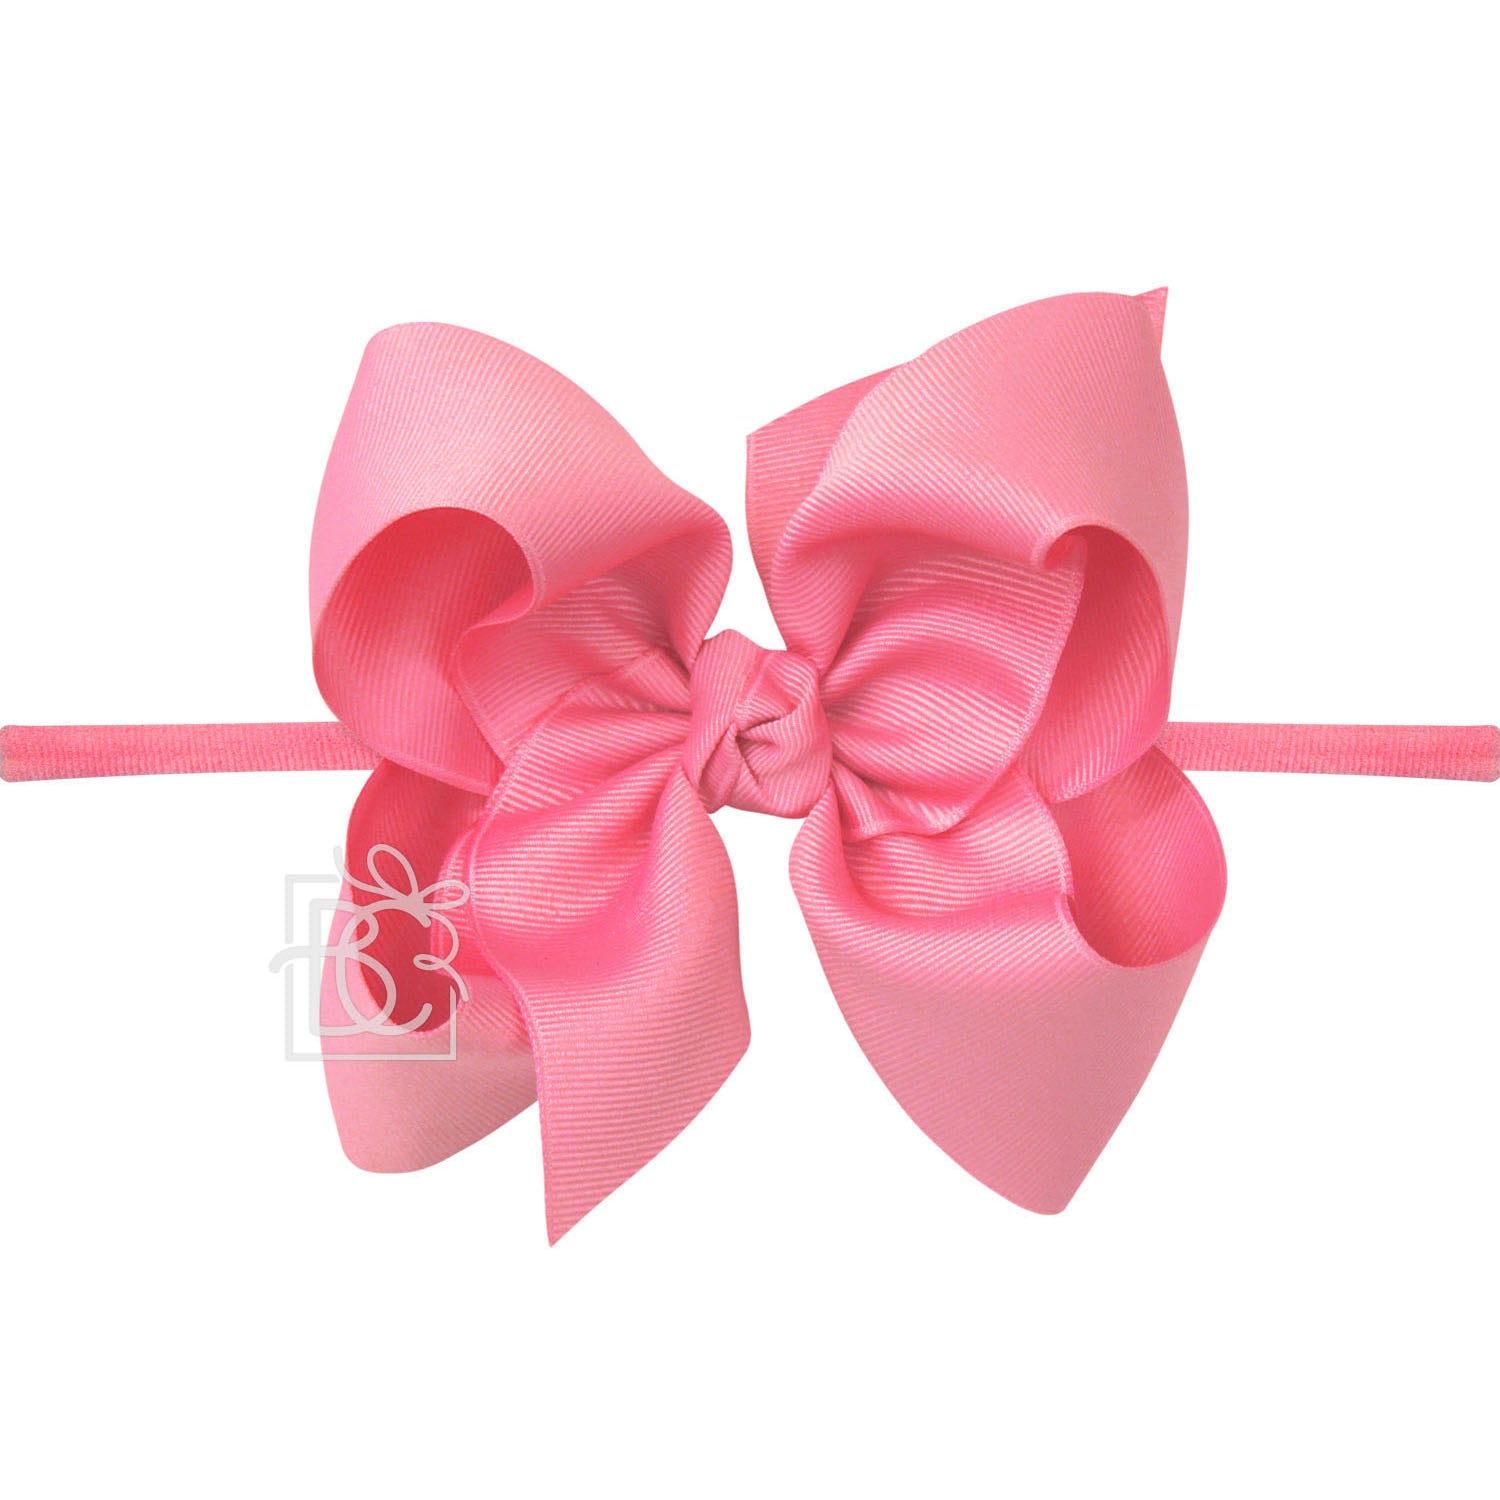 Nylon Headband with Huge Bow in Hot Pink  - Doodlebug's Children's Boutique